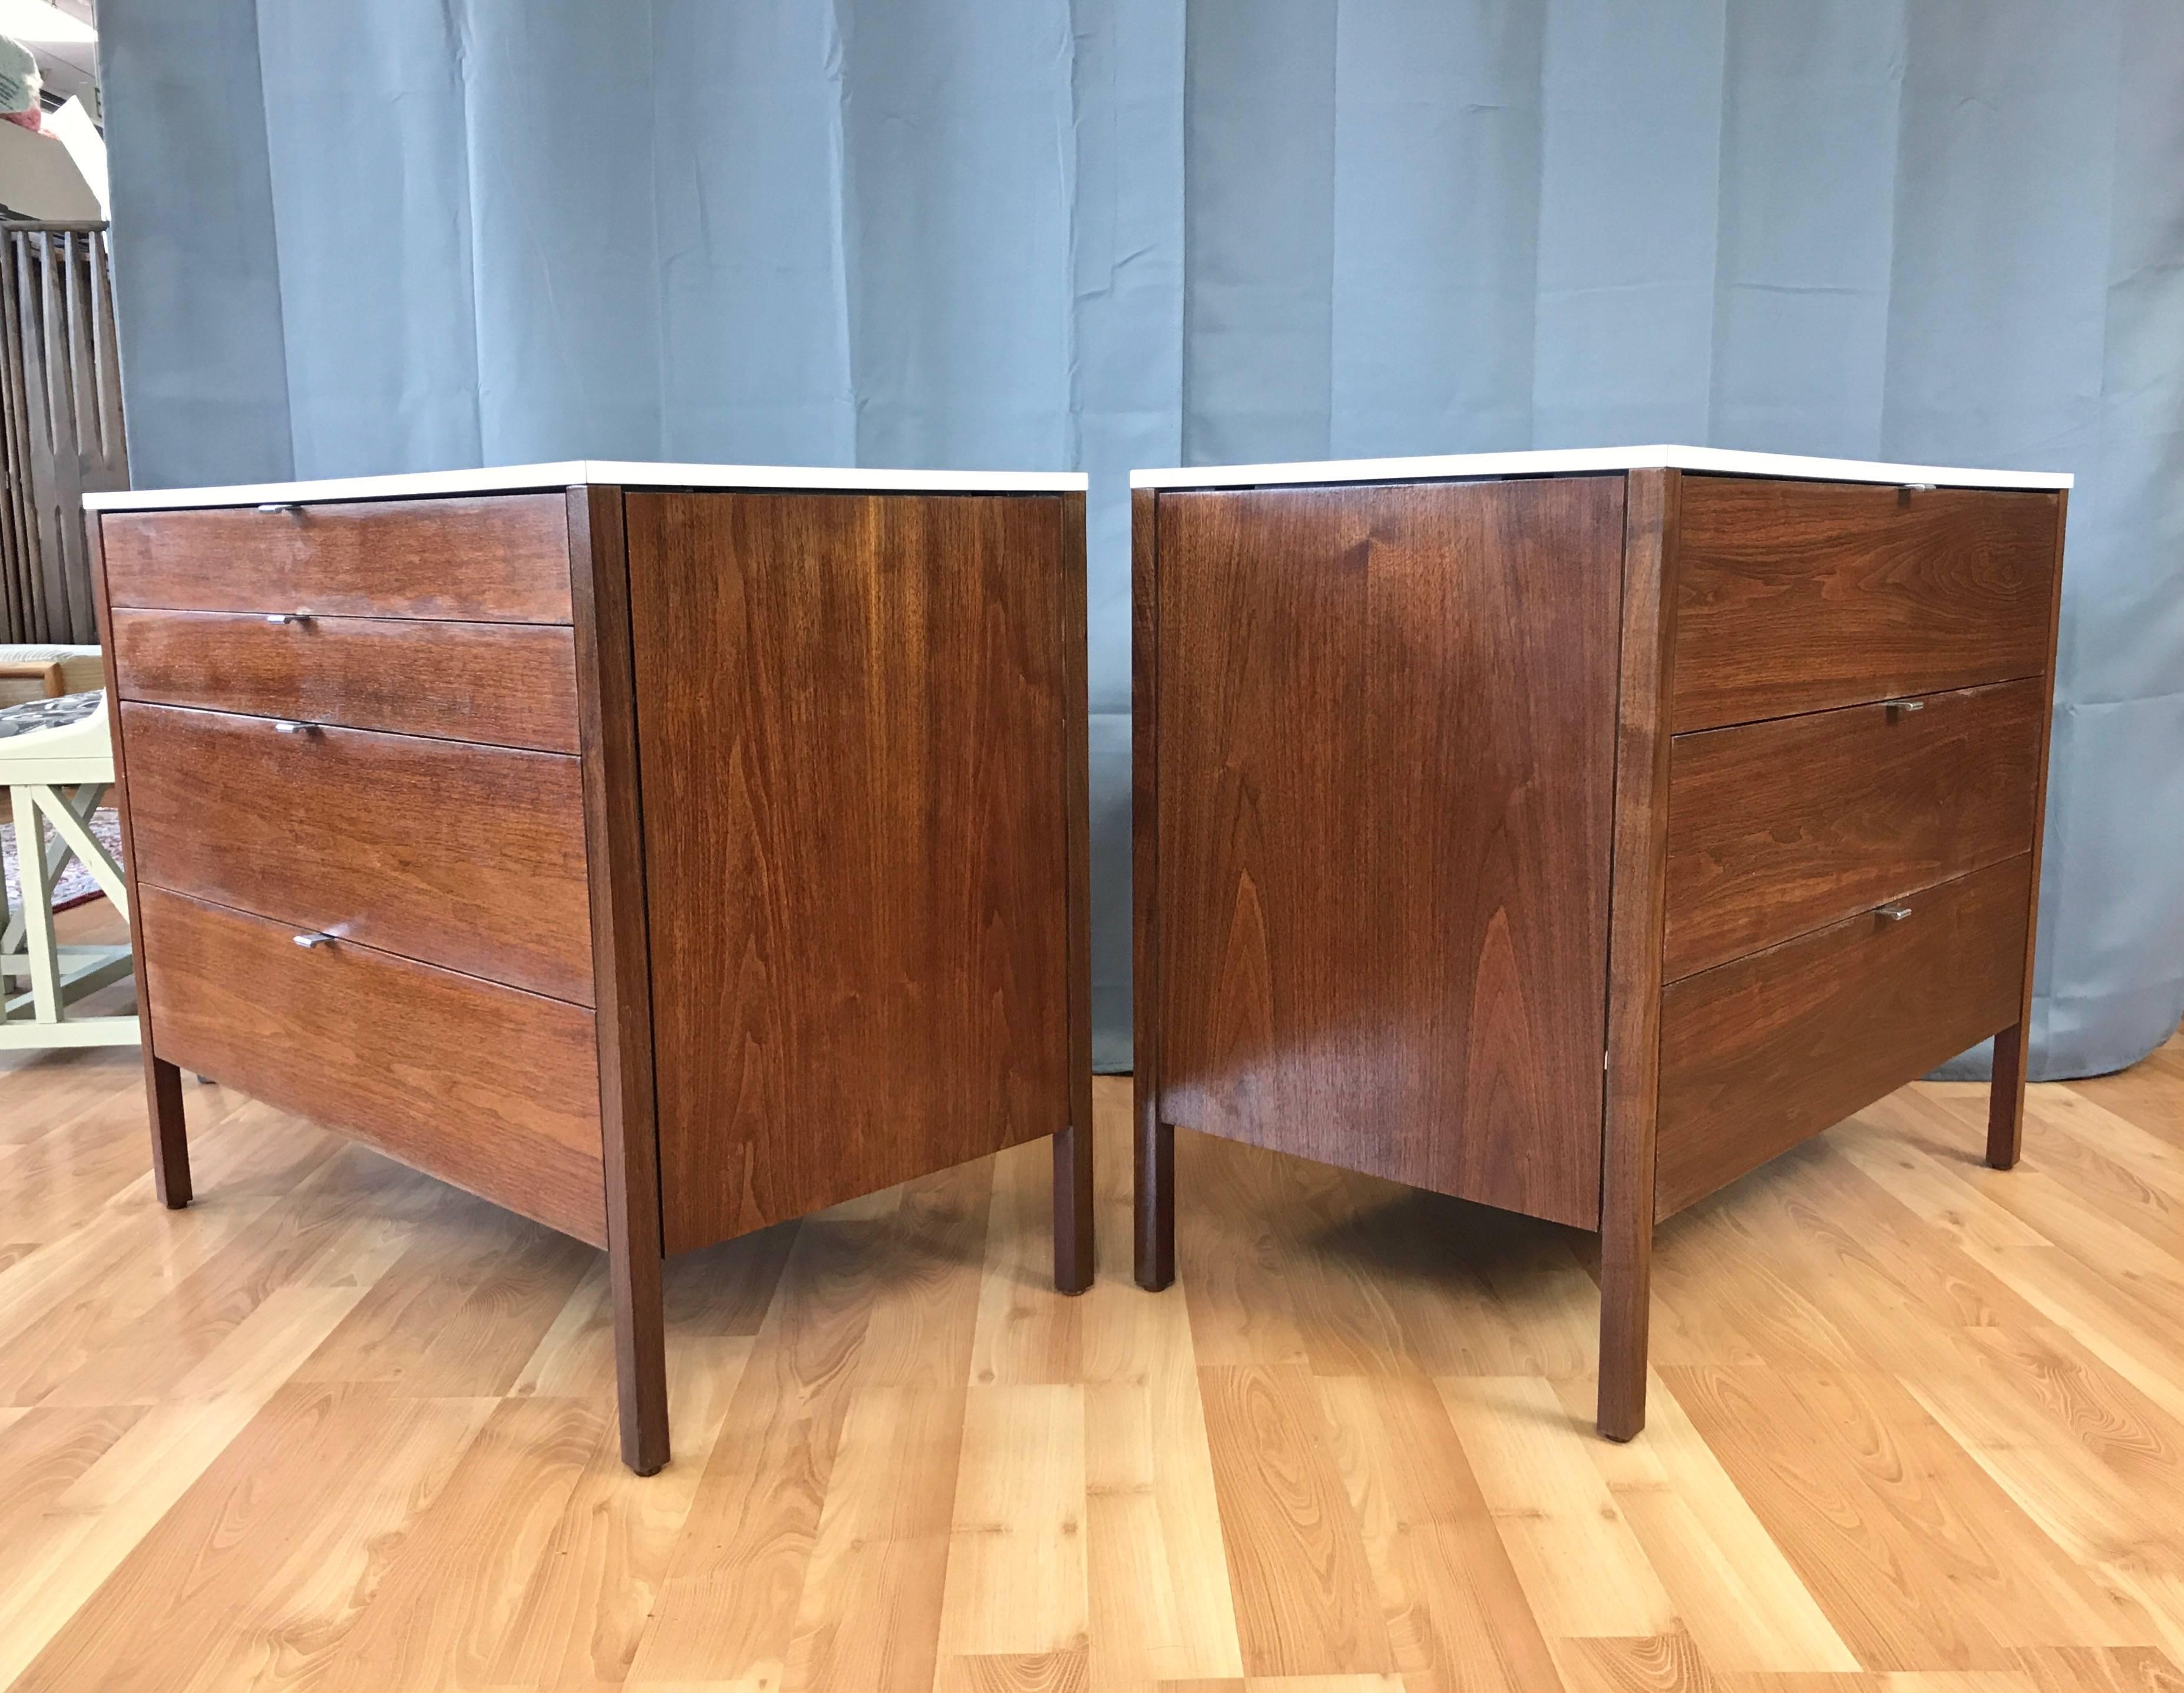 Two Mid-Century Modern walnut dressers or nightstands with white laminate tops designed by Florence Knoll for Knoll Associates in 1957.

Knoll’s signature Minimalist design aesthetic is perfectly expressed by these handsome chests, one with four